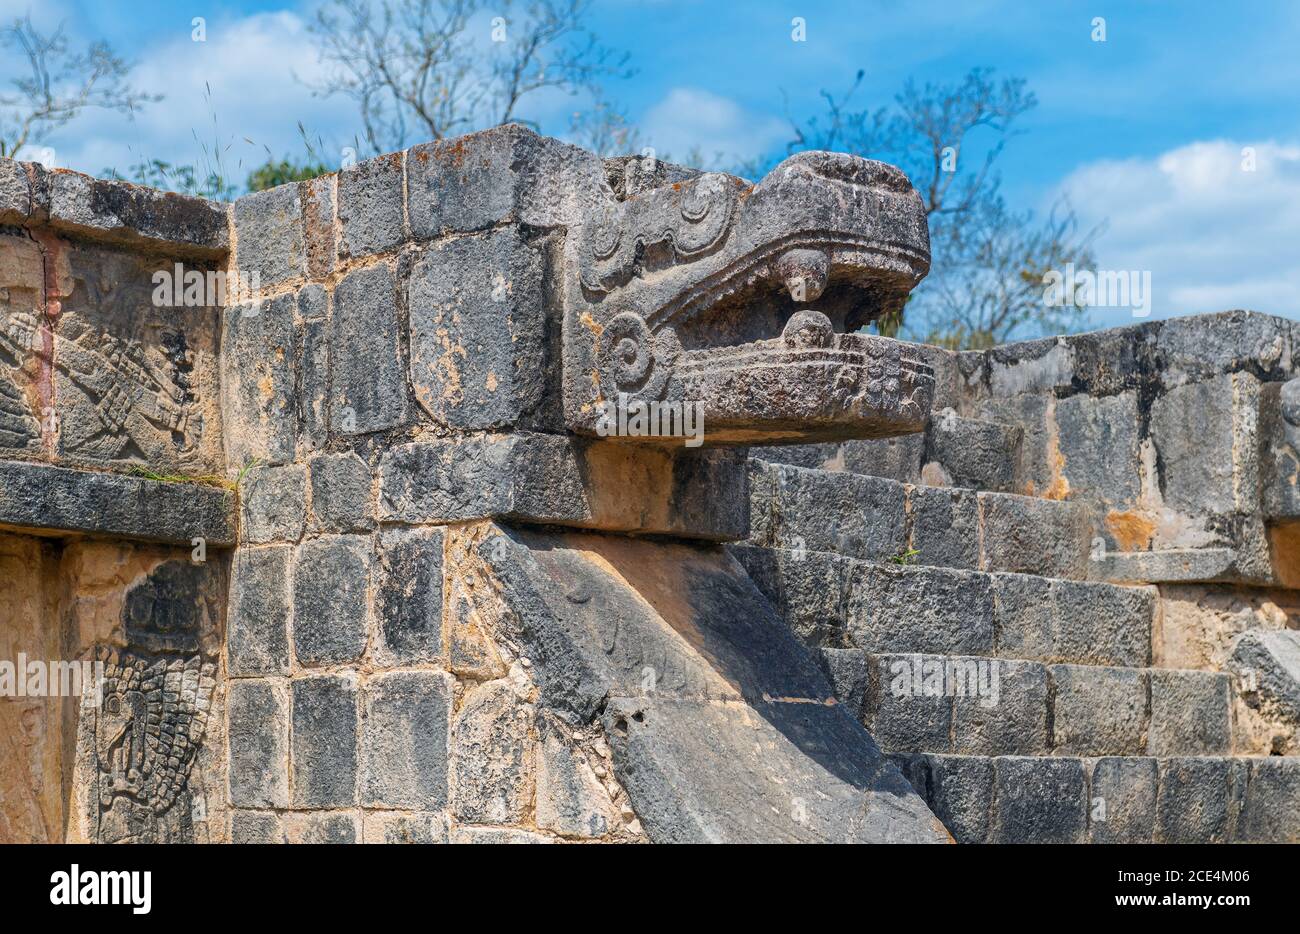 Stone sculpture of the feathered snake and god Quetzalcoatl, deity of creation and life for Aztec and Maya civilization, Chichen Itza, Mexico. Stock Photo